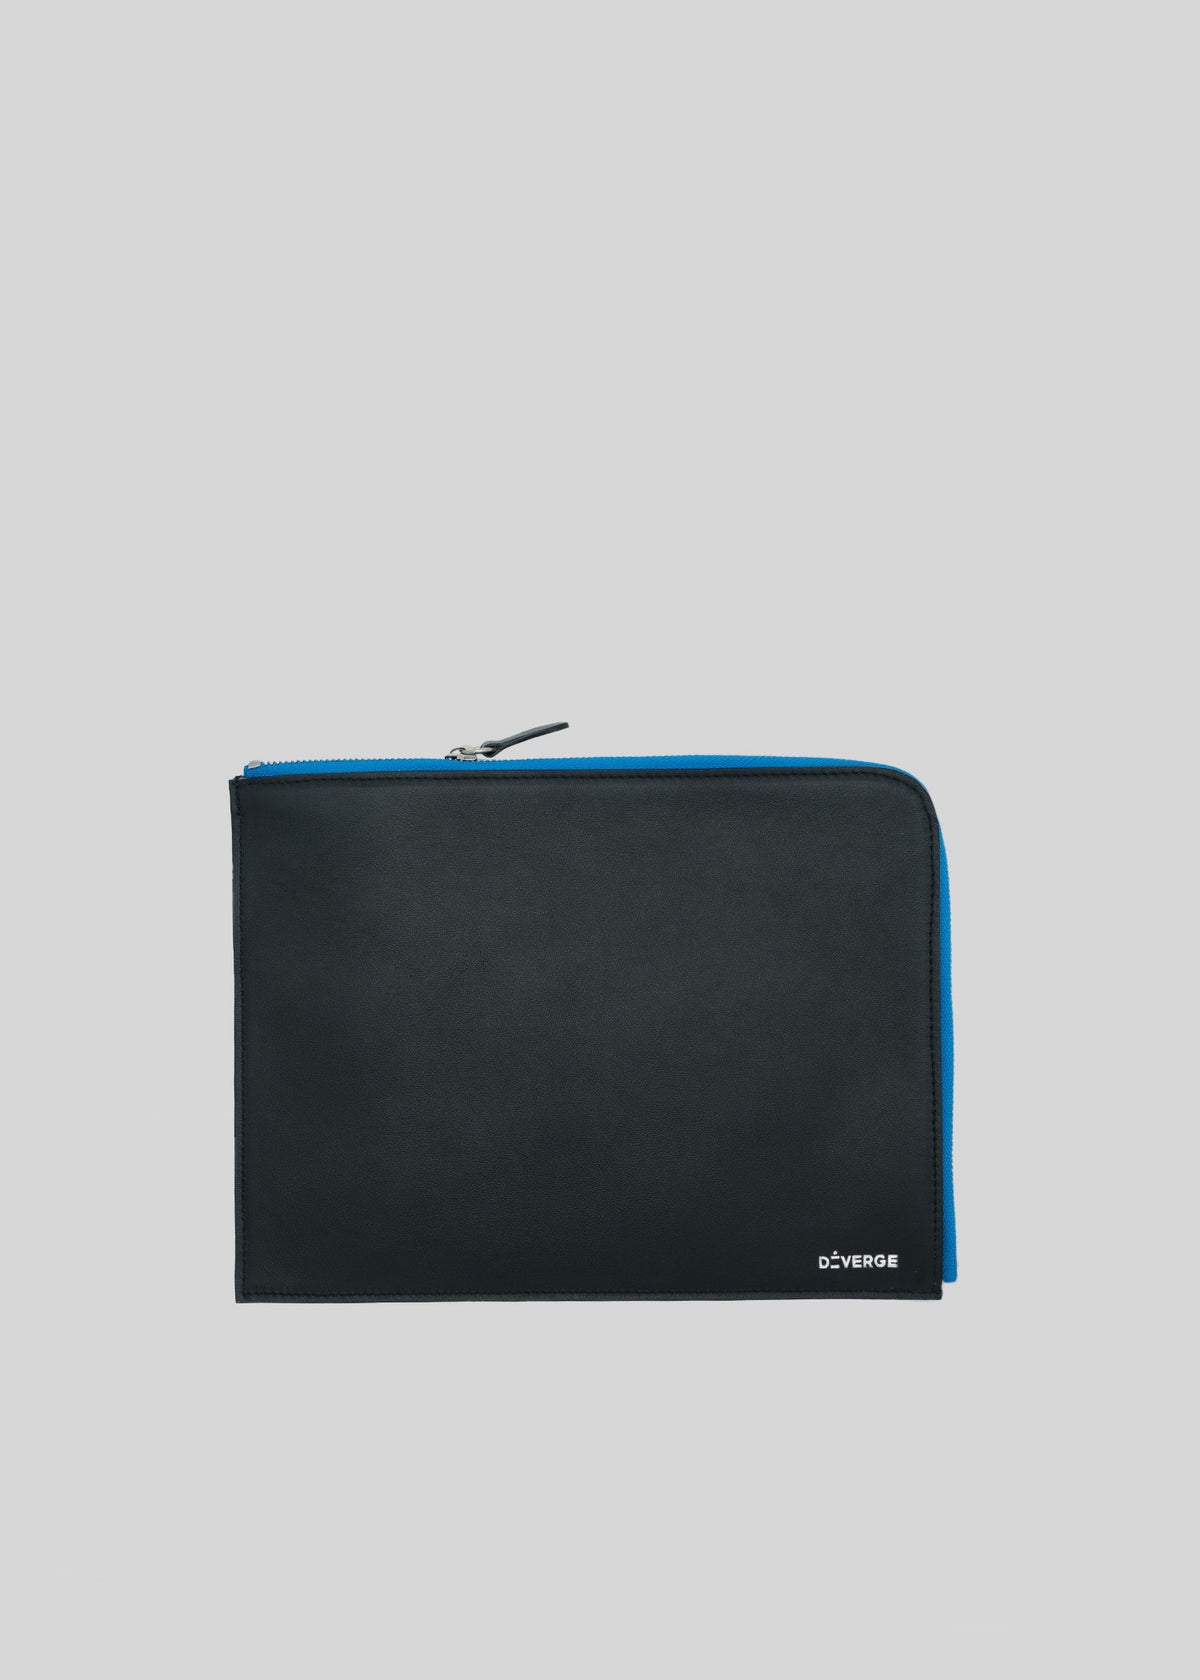 A black M Leather Pouch Black w/ Blue wallet with a blue zipper, isolated on a white background.